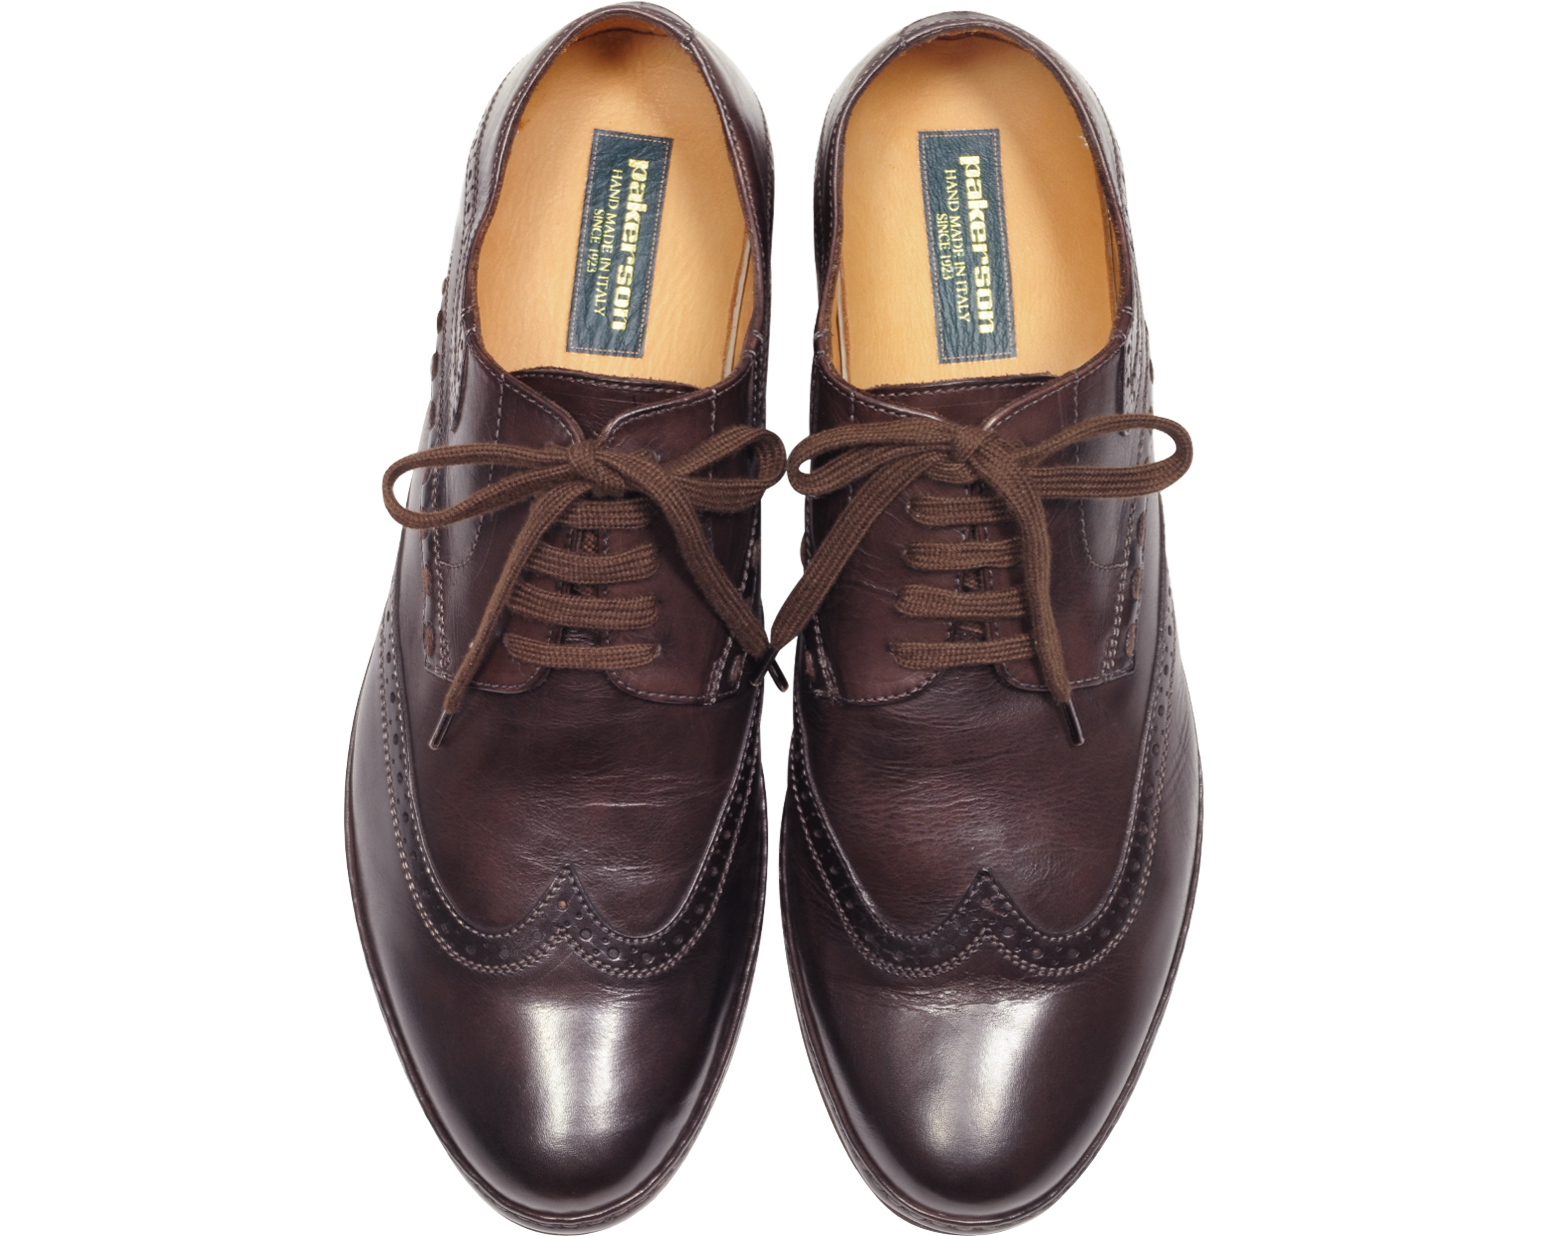 Dark Brown Leather Oxfords Made In Italy